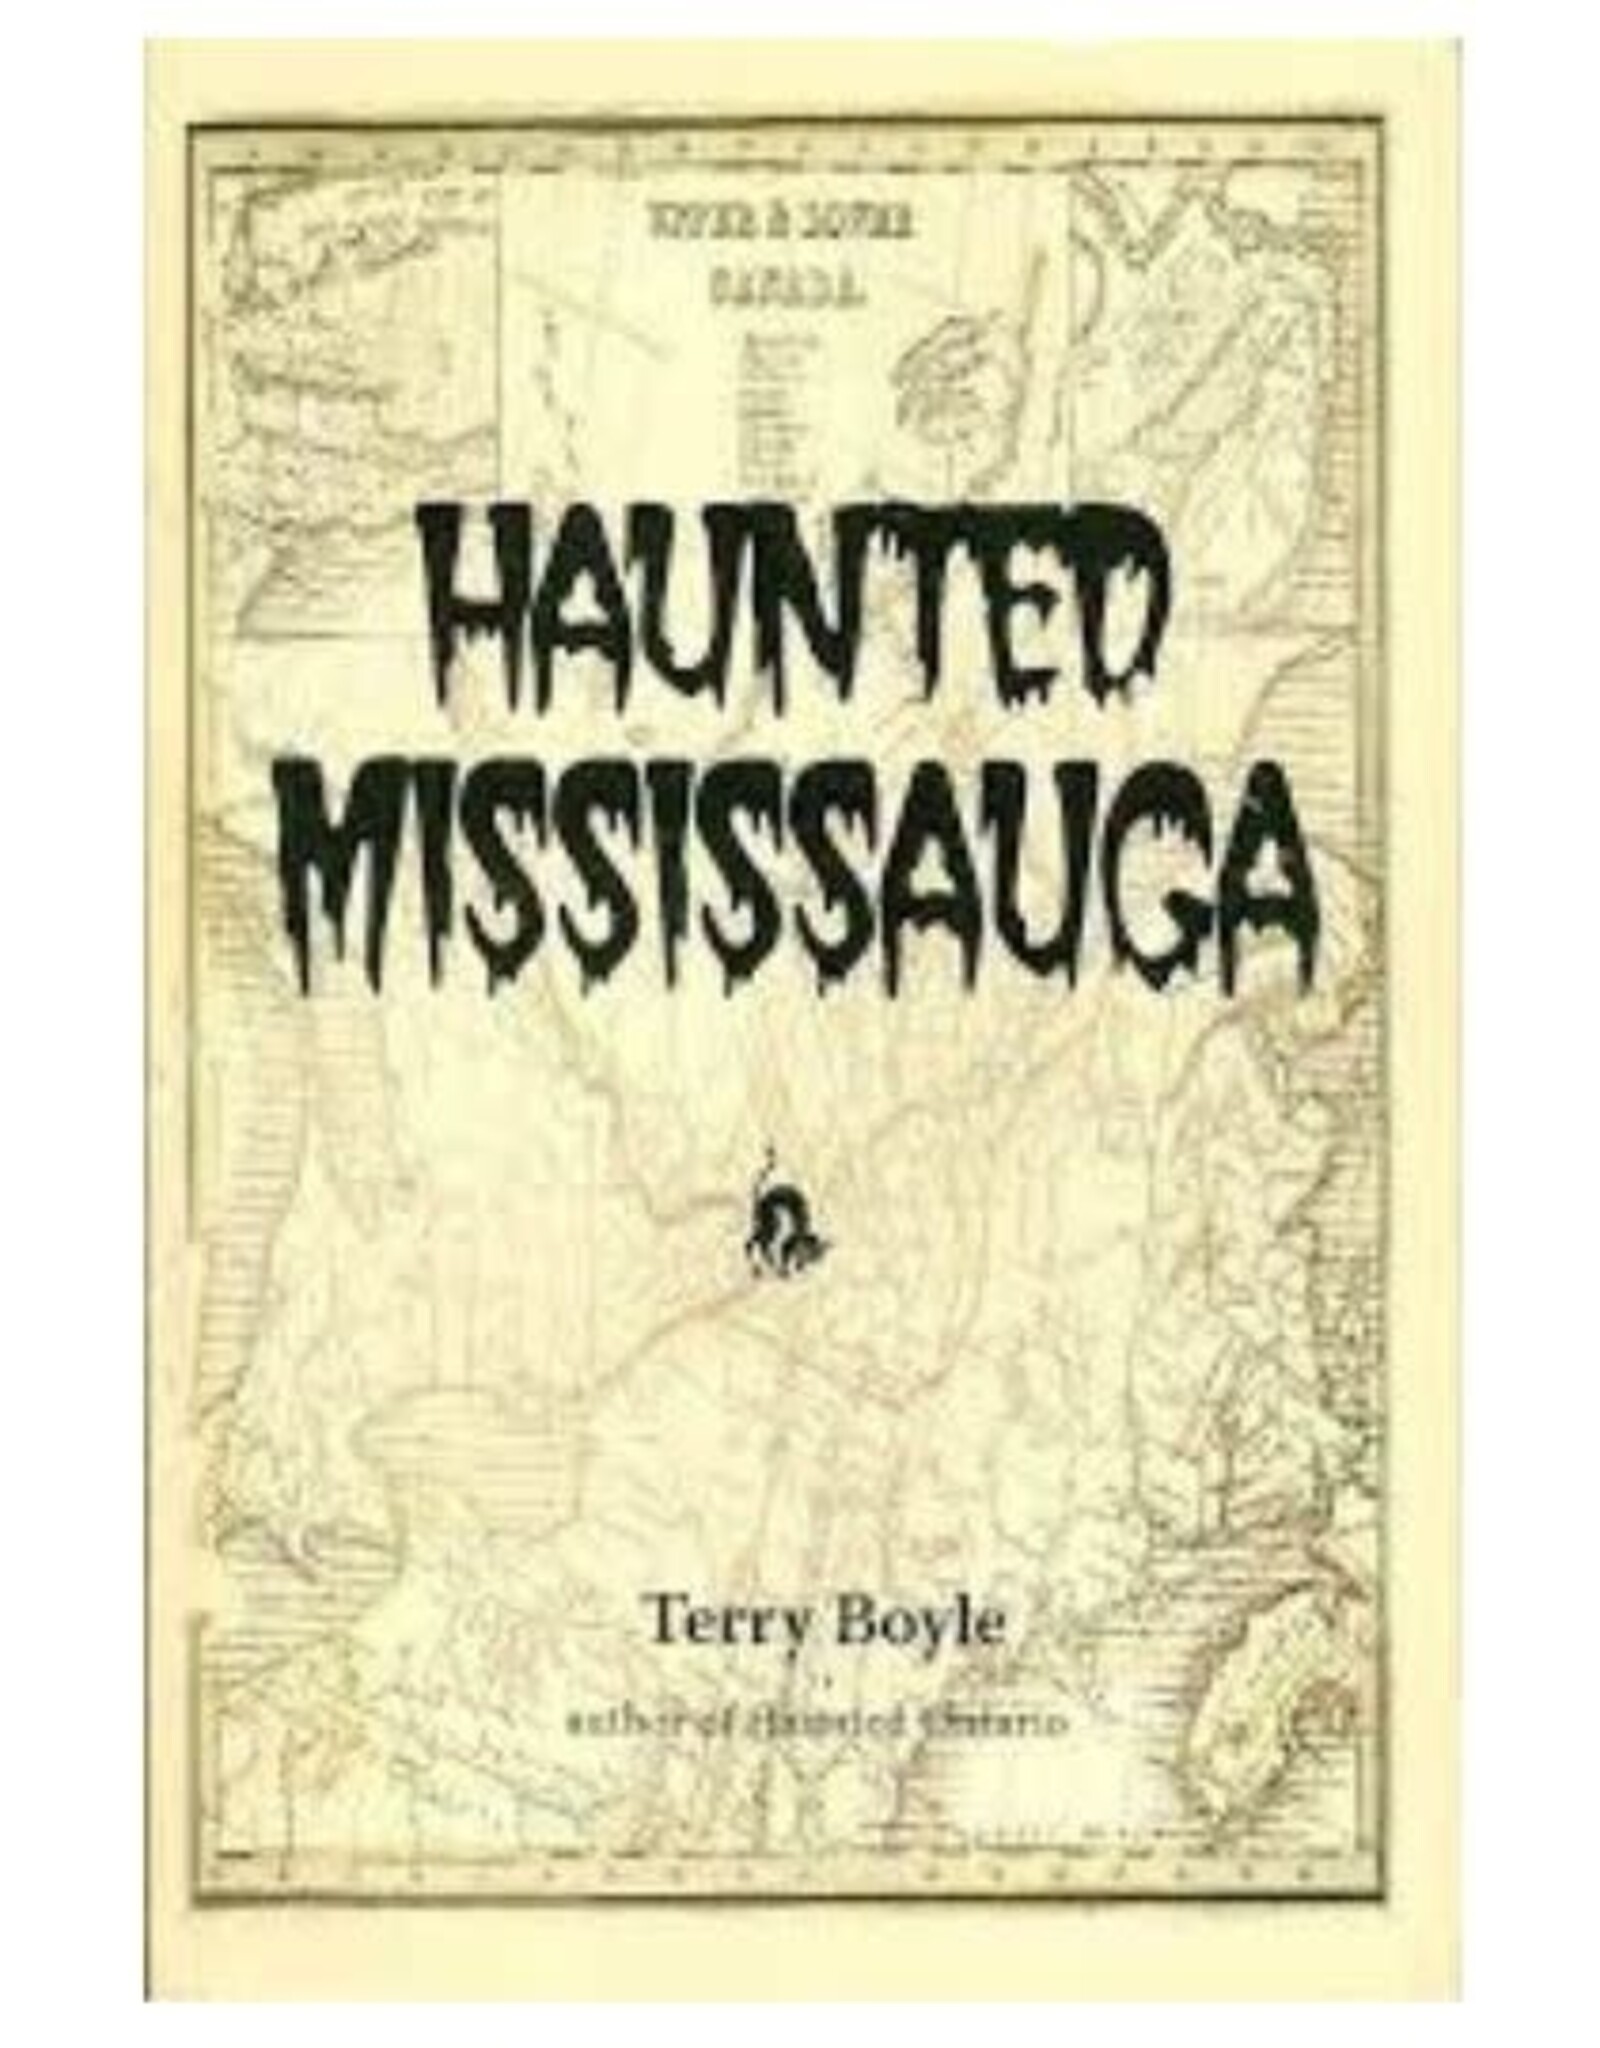 Terry Boyle Haunted Mississauga by Terry Boyle